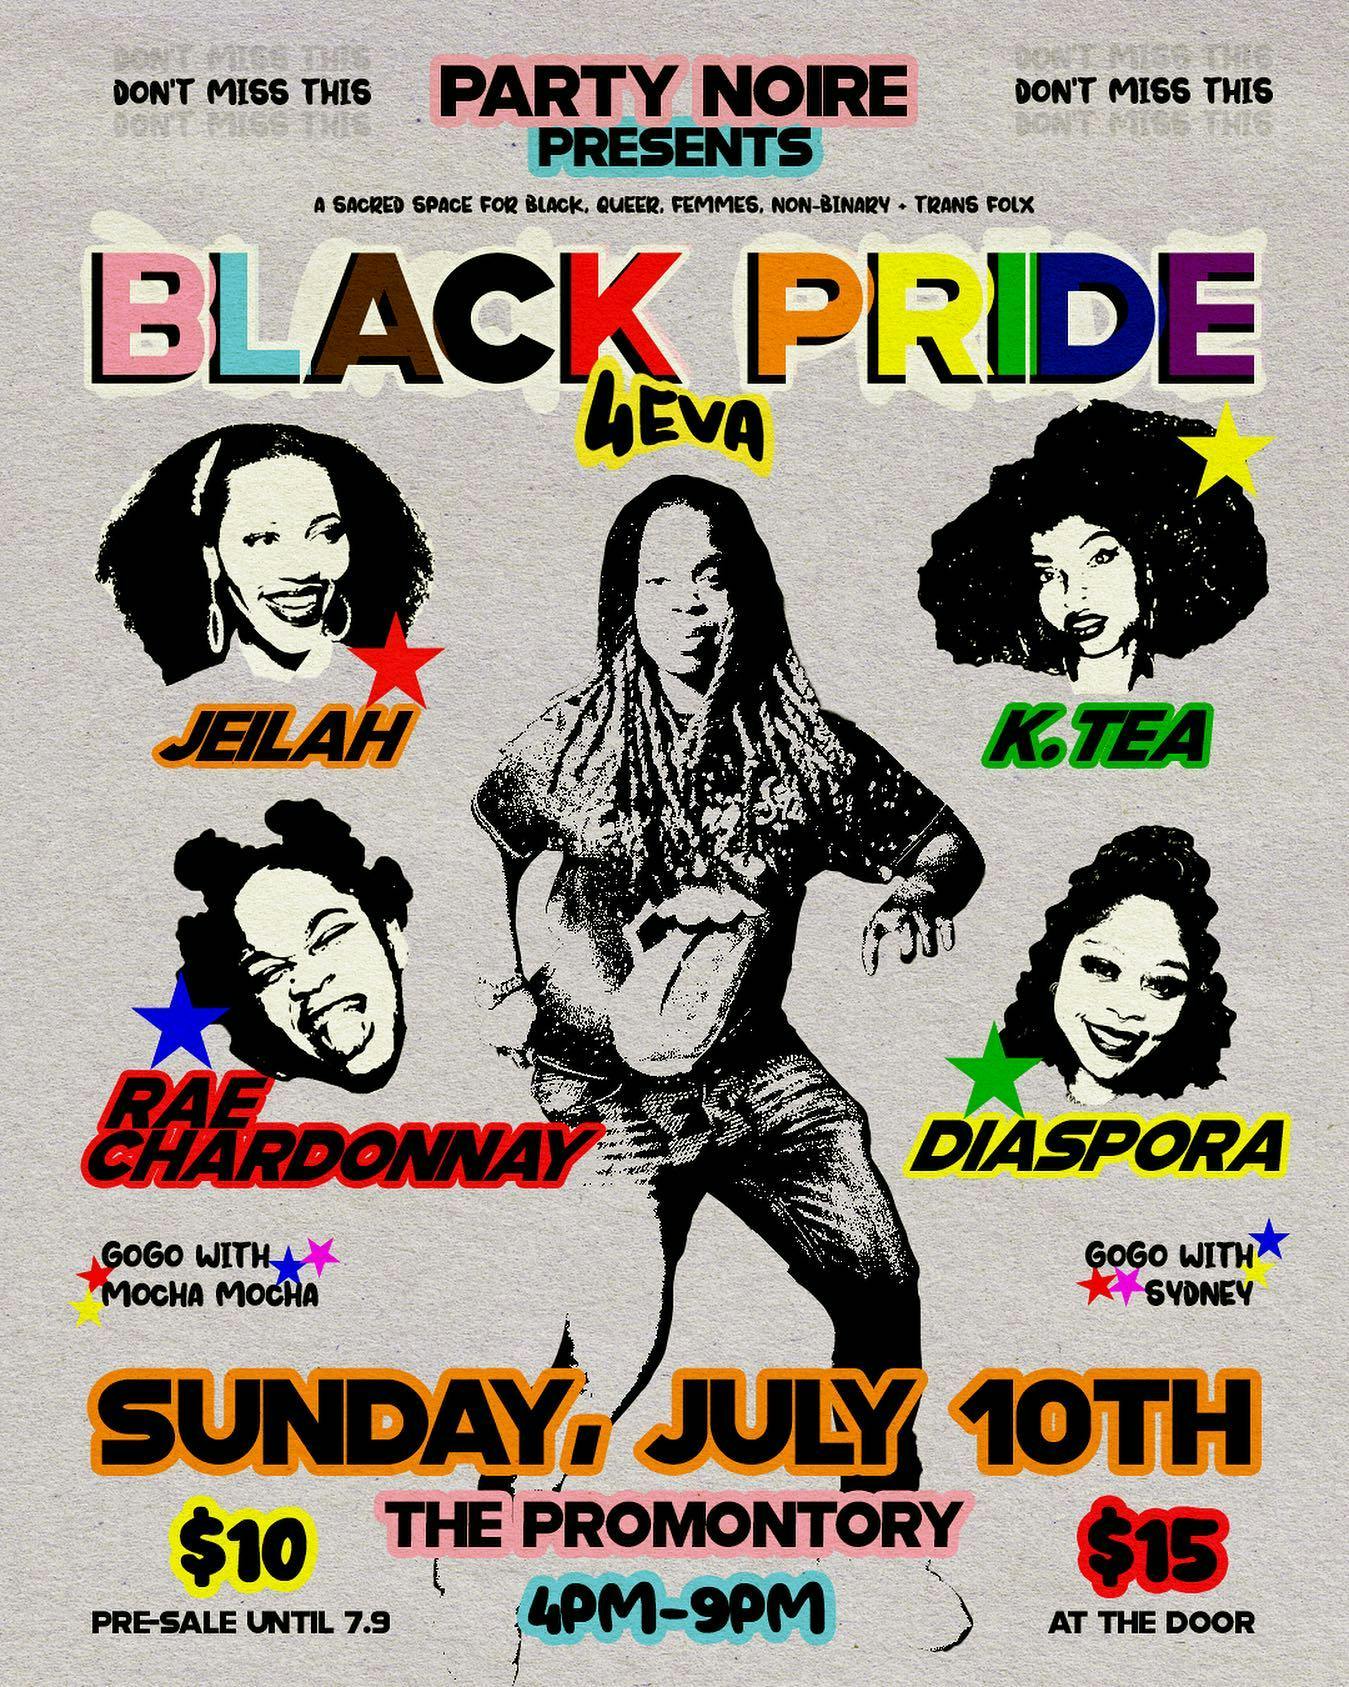 Honoring queer legends in music and the sounds they pioneered with groovy tunes, all kinds of House tones, and funky dance music you won’t be able to stand still to at @partynoire’s Black Pride 4evaaaaa Sunday.    
   
Come enjoy!   
   
🎨 @adobewankenobii   
 .   
.   
.   
.   
.   
#PartyNoire #BlackJoy #chicagoqueers #PartyNoireChicago #blackqueer #POC #QPOC #LGBTQ#chicago #queernightlife #BlackWomen #BlackWomyn#LoveBlackWomen #blacklgbt #blkcreatives #queerevents#blackchicago #QPOCChicago #hereforBlackJoy #lesbiansofcolor #LoveisLove #Pride #QueerChicago  #chicagocreatives#chicagolesbian #chicagoevents #blackqueers